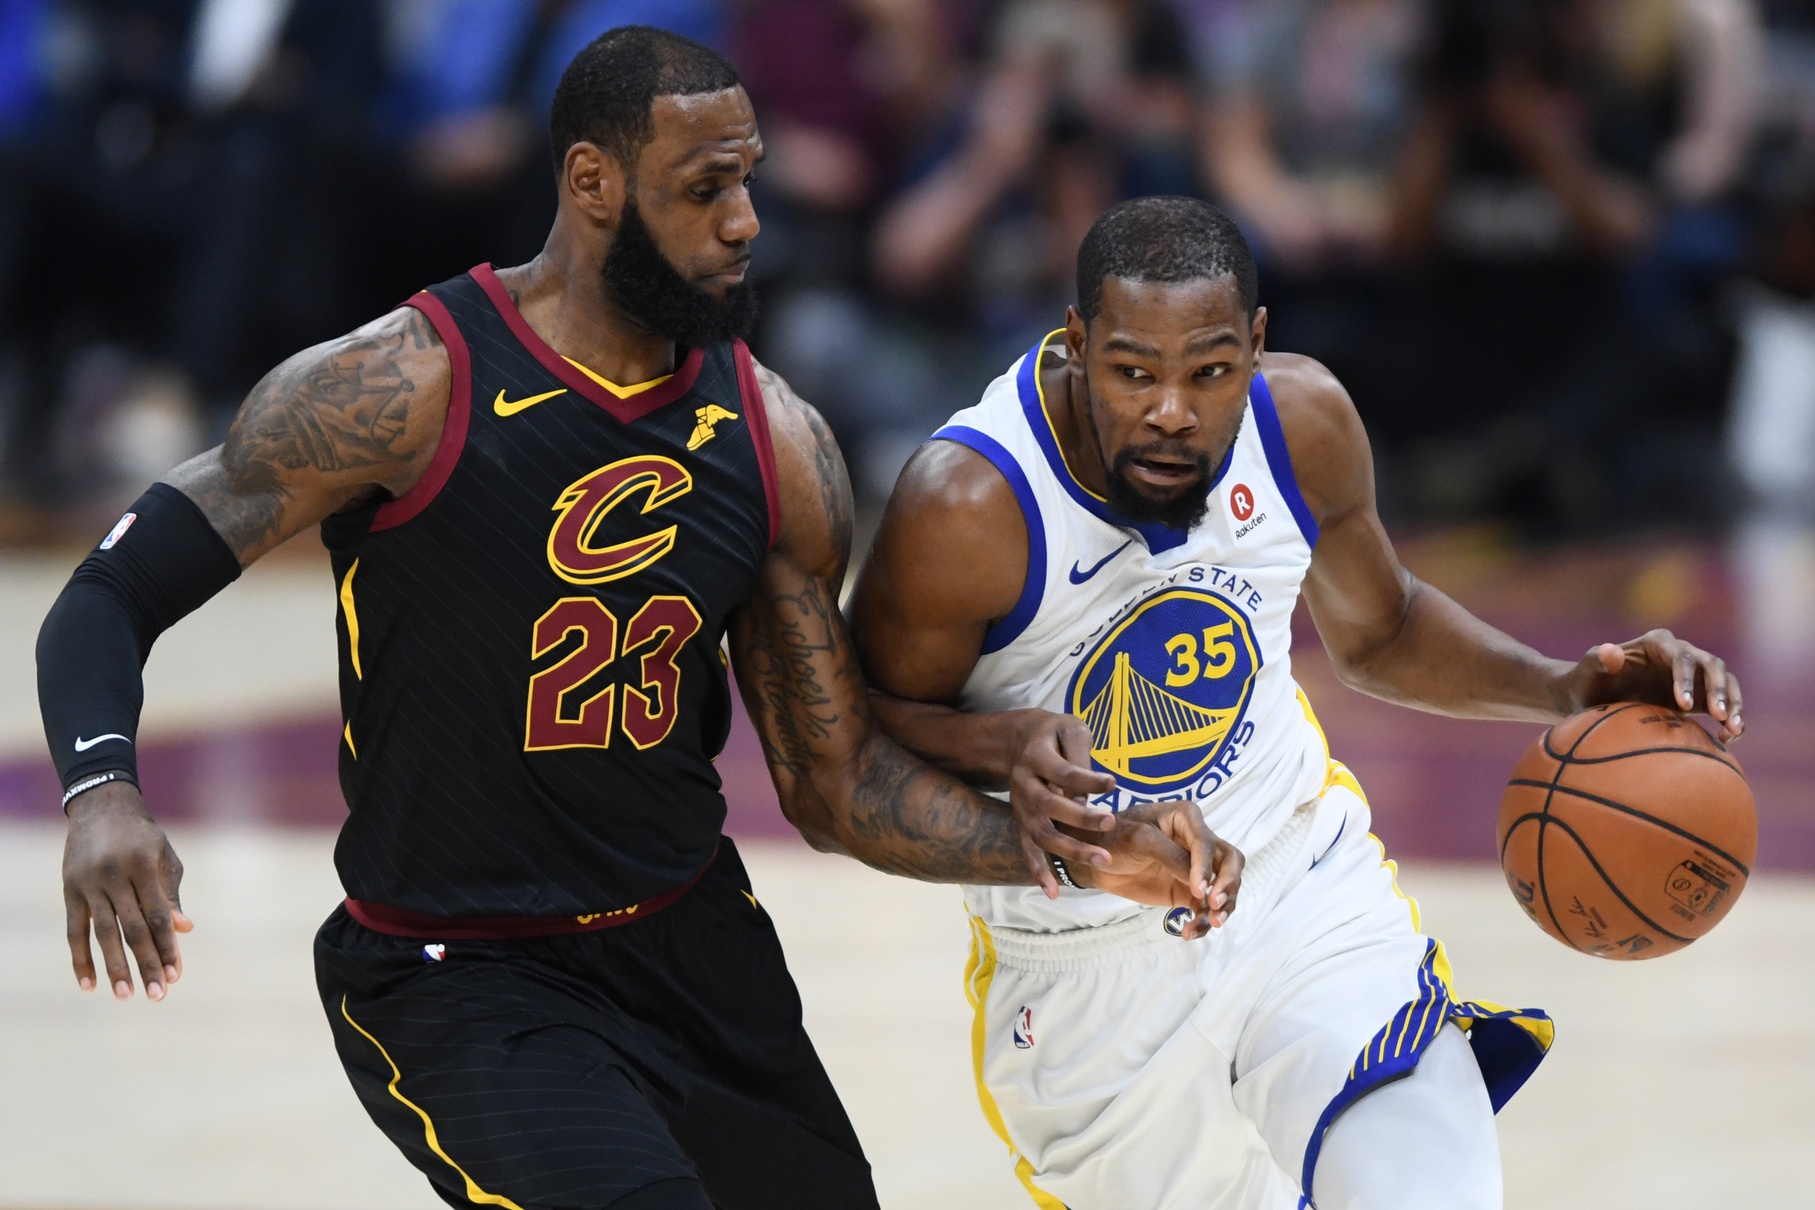 Lakers Kevin Durant, LeBron James Have Only Faced Off Once Since James